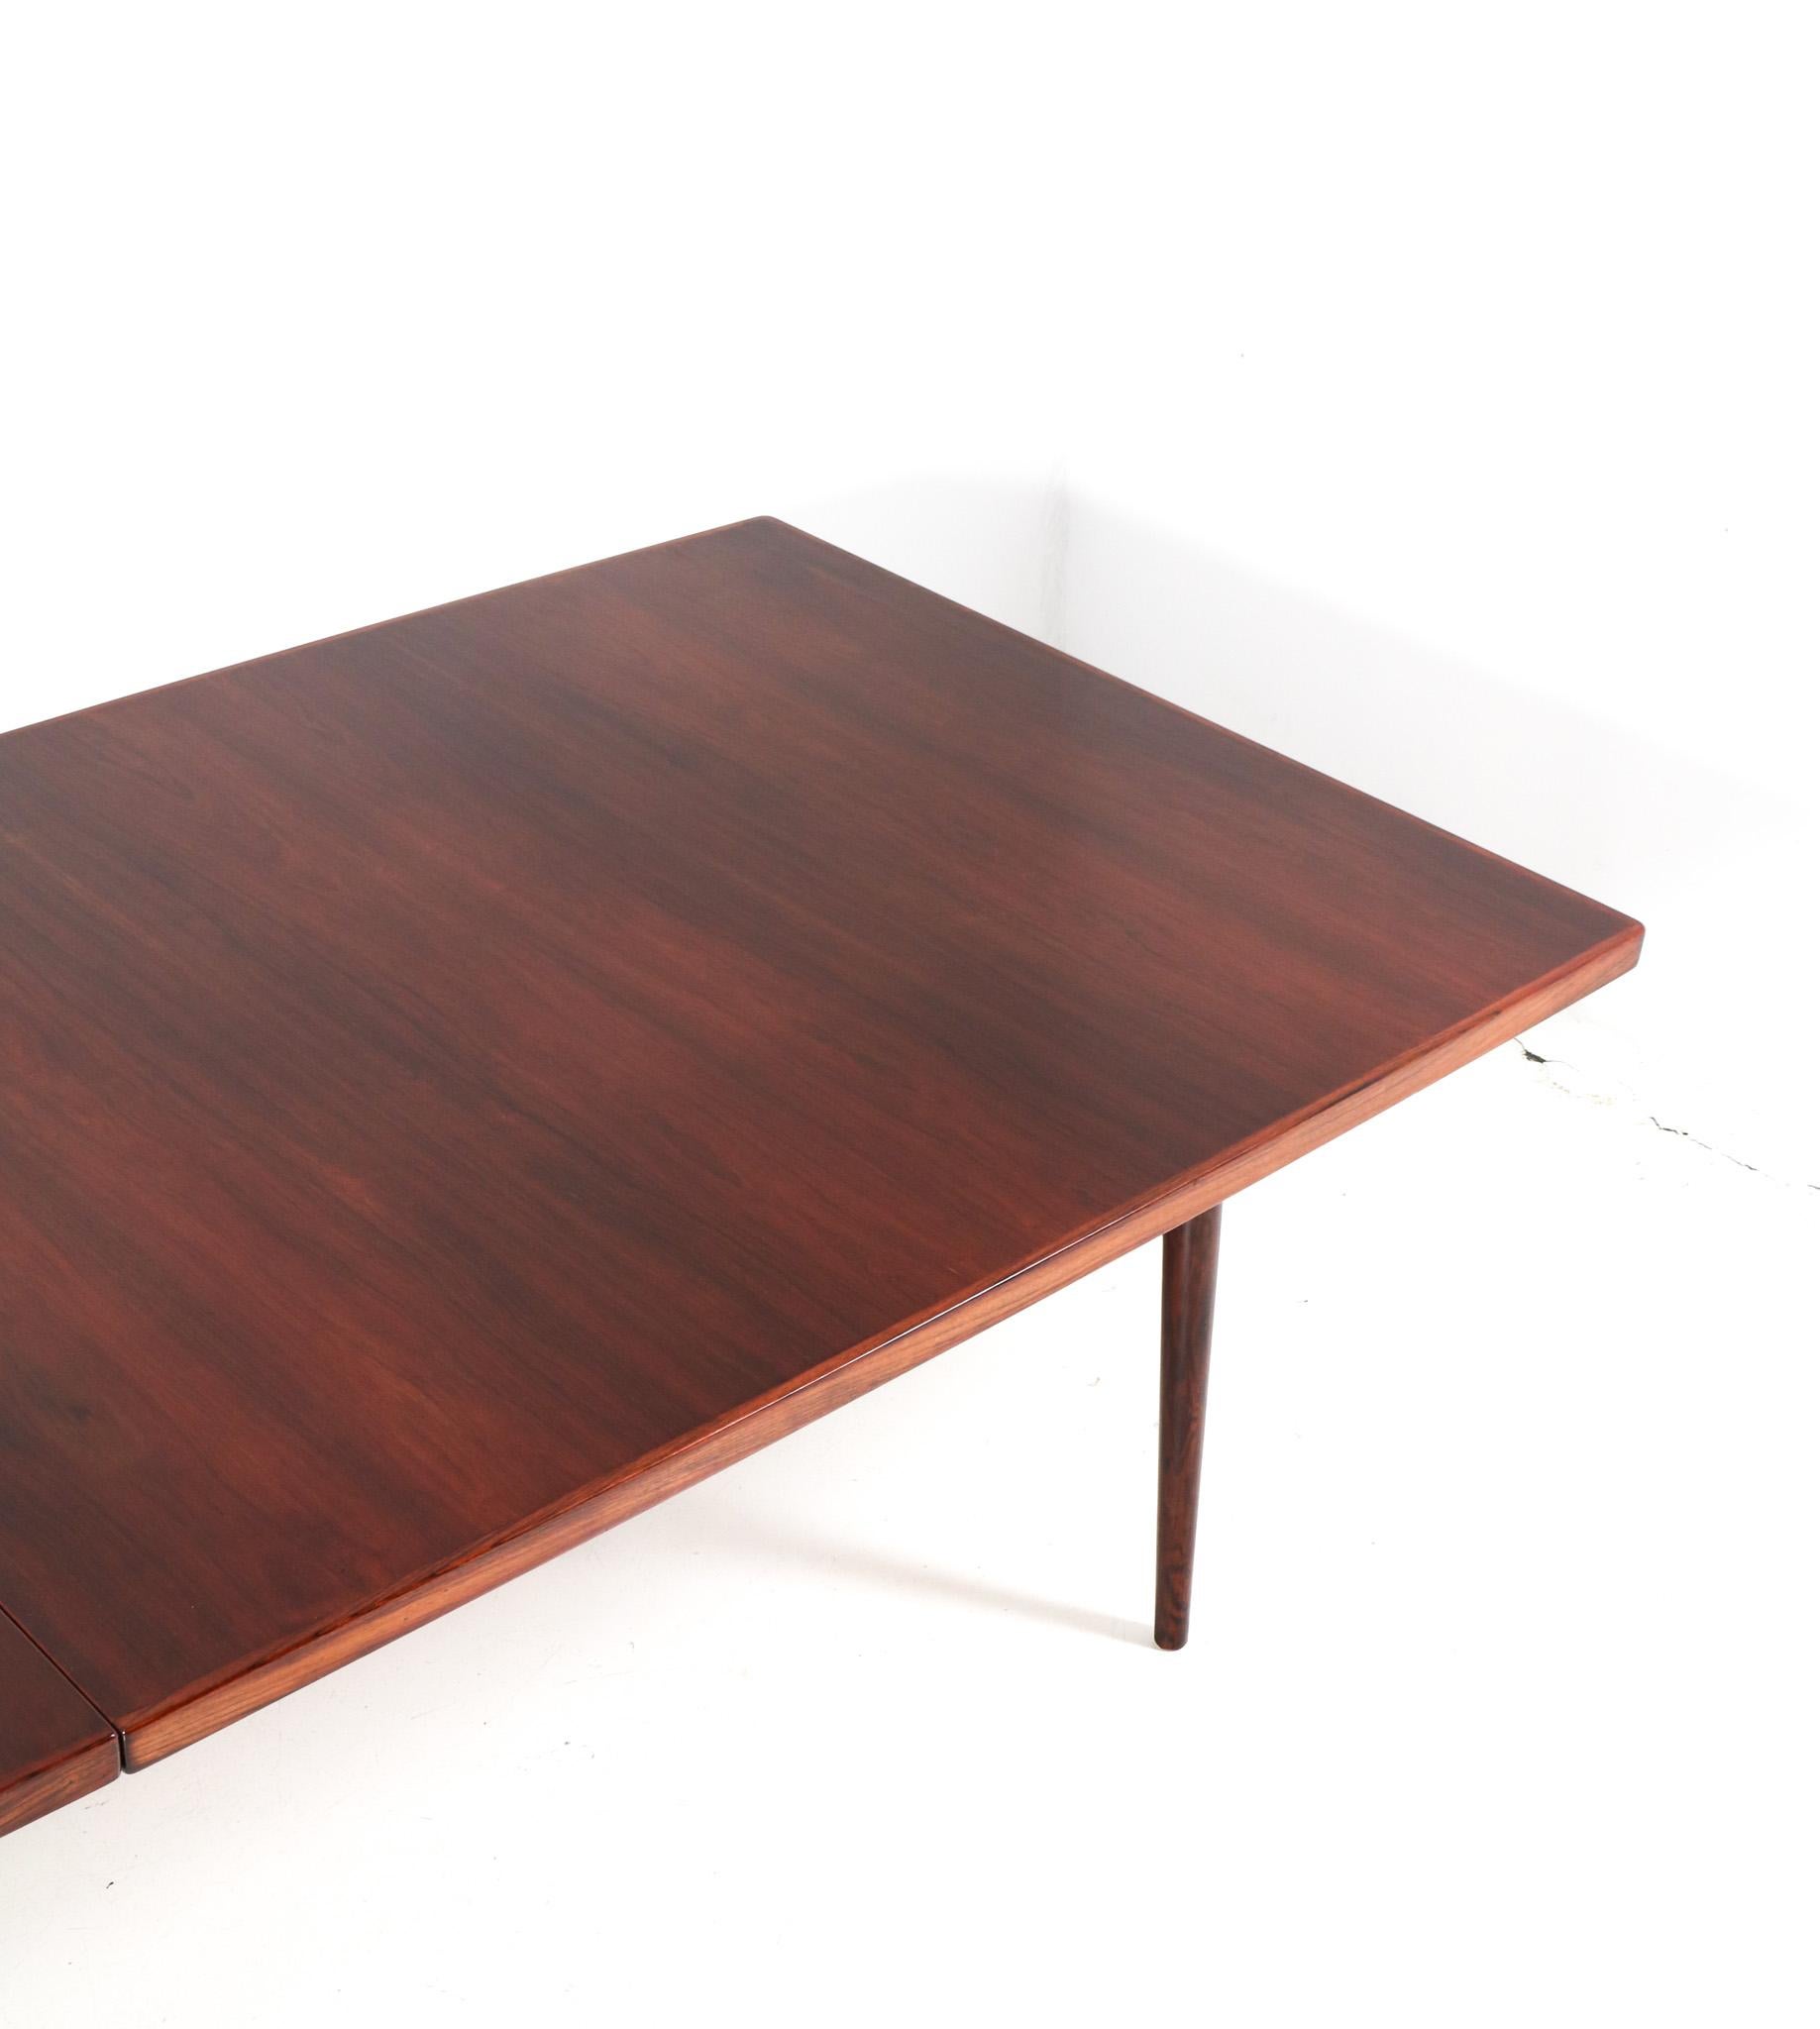 XL Mid-Century Modern Rosewood Conference Table by Arne Vodder for Sibast For Sale 7